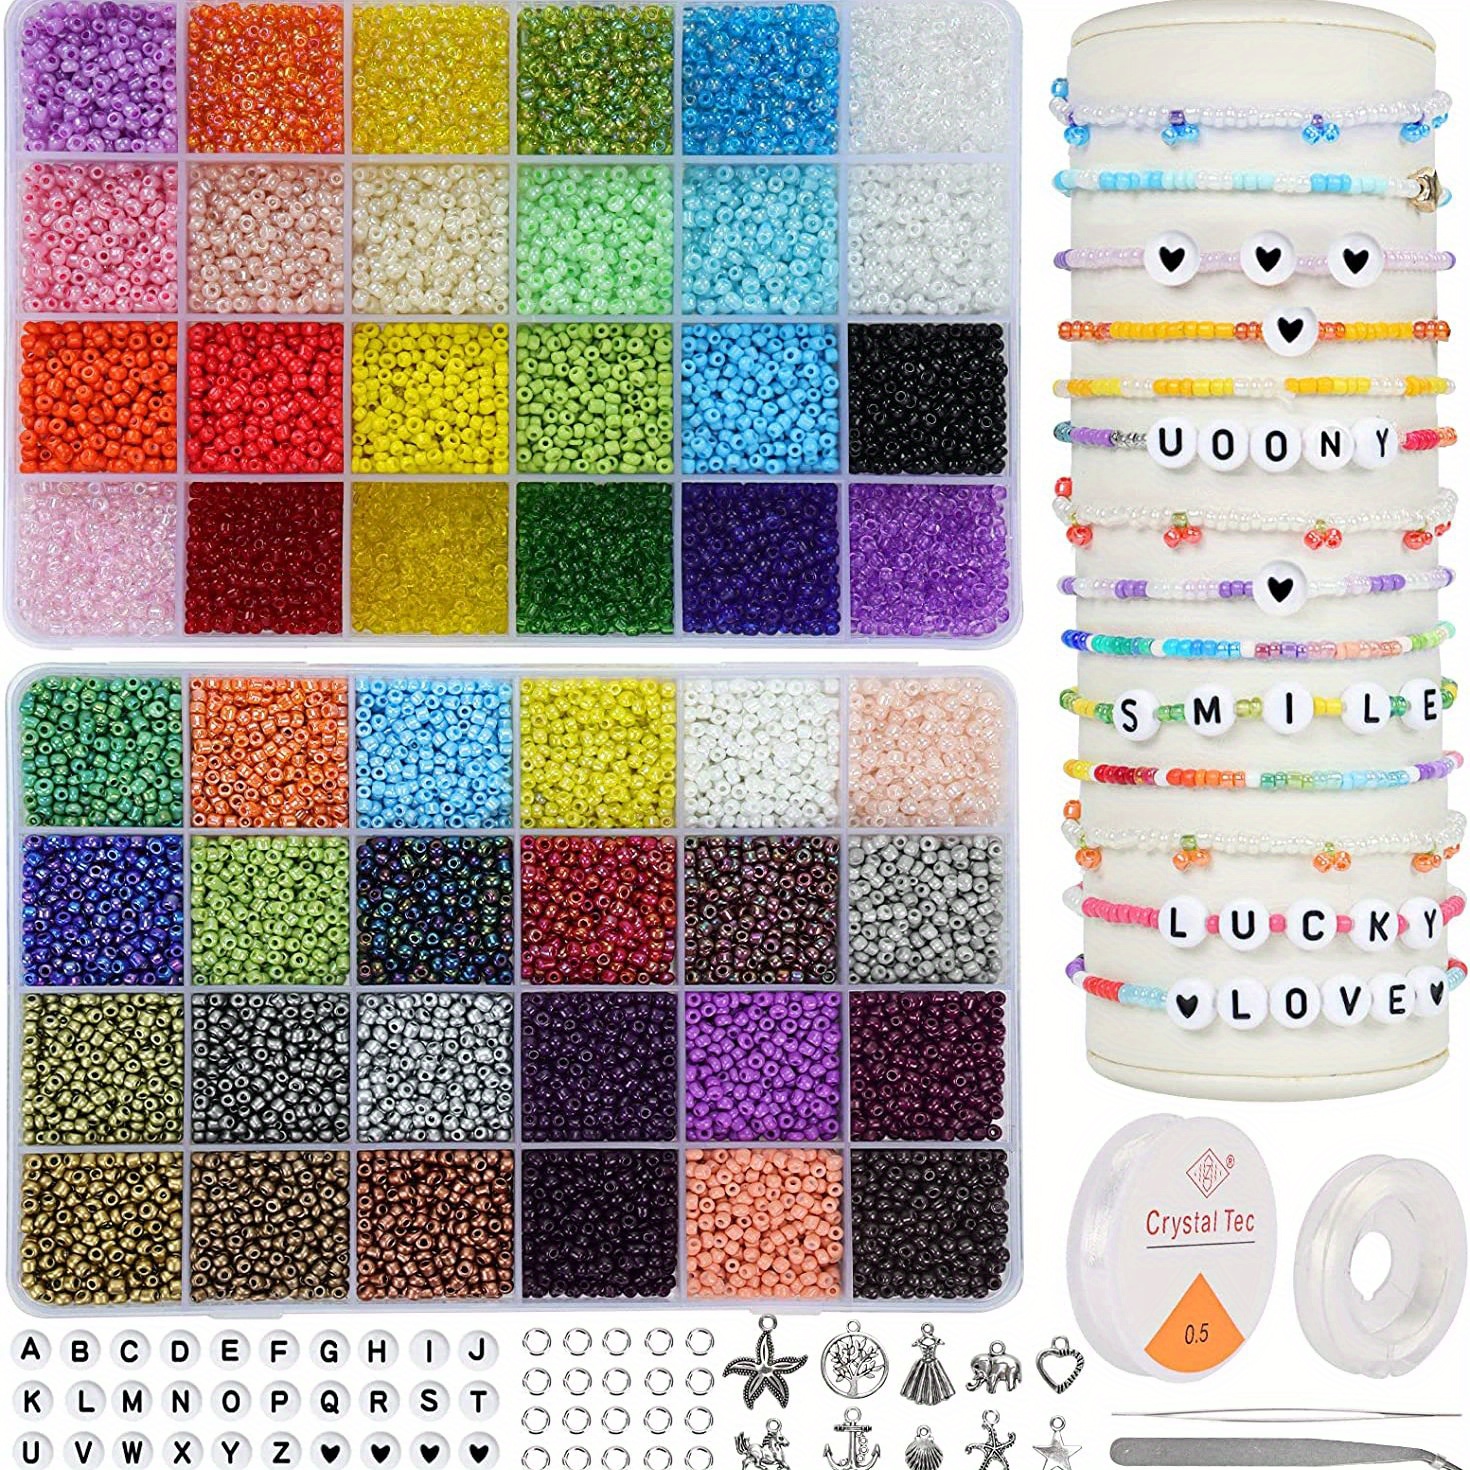 UOONY 35000pcs 2mm Glass Seed Beads for Jewelry Making Kit 250pcs Alphabet  Letter Beads Tiny Beads Set for Bracelets Making DIY Art and Craft with  Rolls of Elastic String Cord Charms and